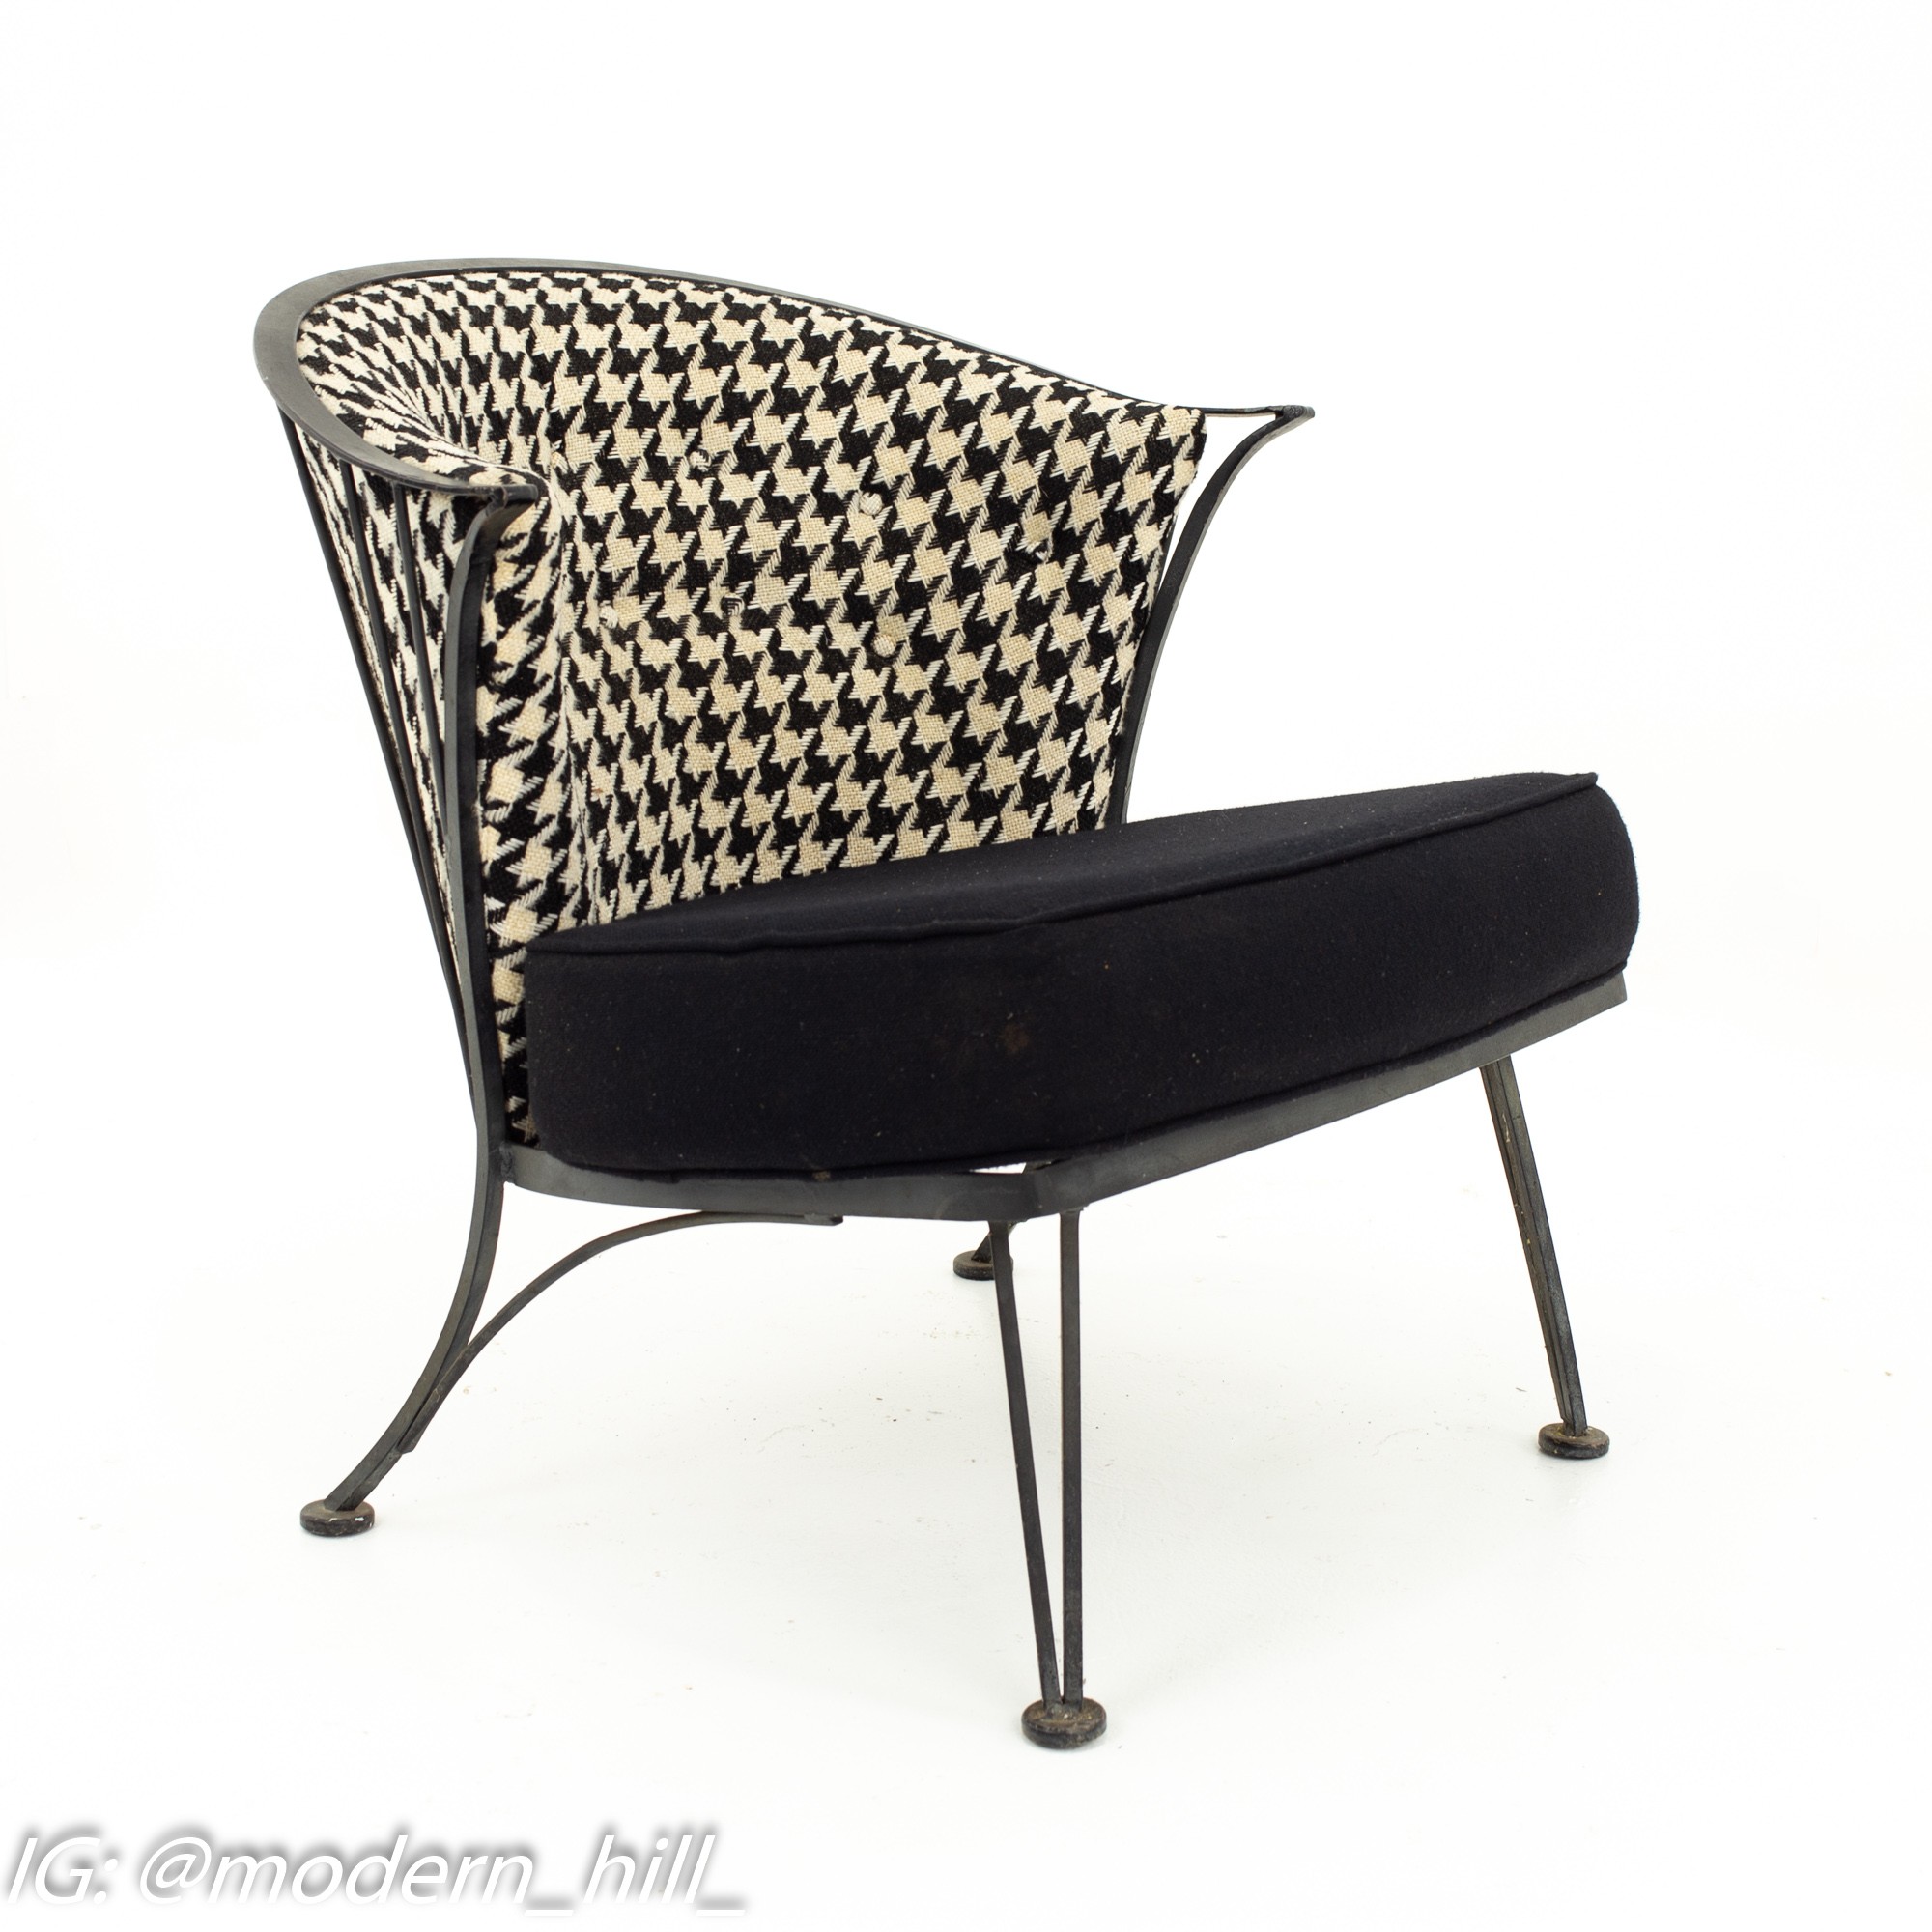 Salterini Mid Century Outdoor Wrought Iron and Black and White Houndstooth Patio Chairs - Set of 3